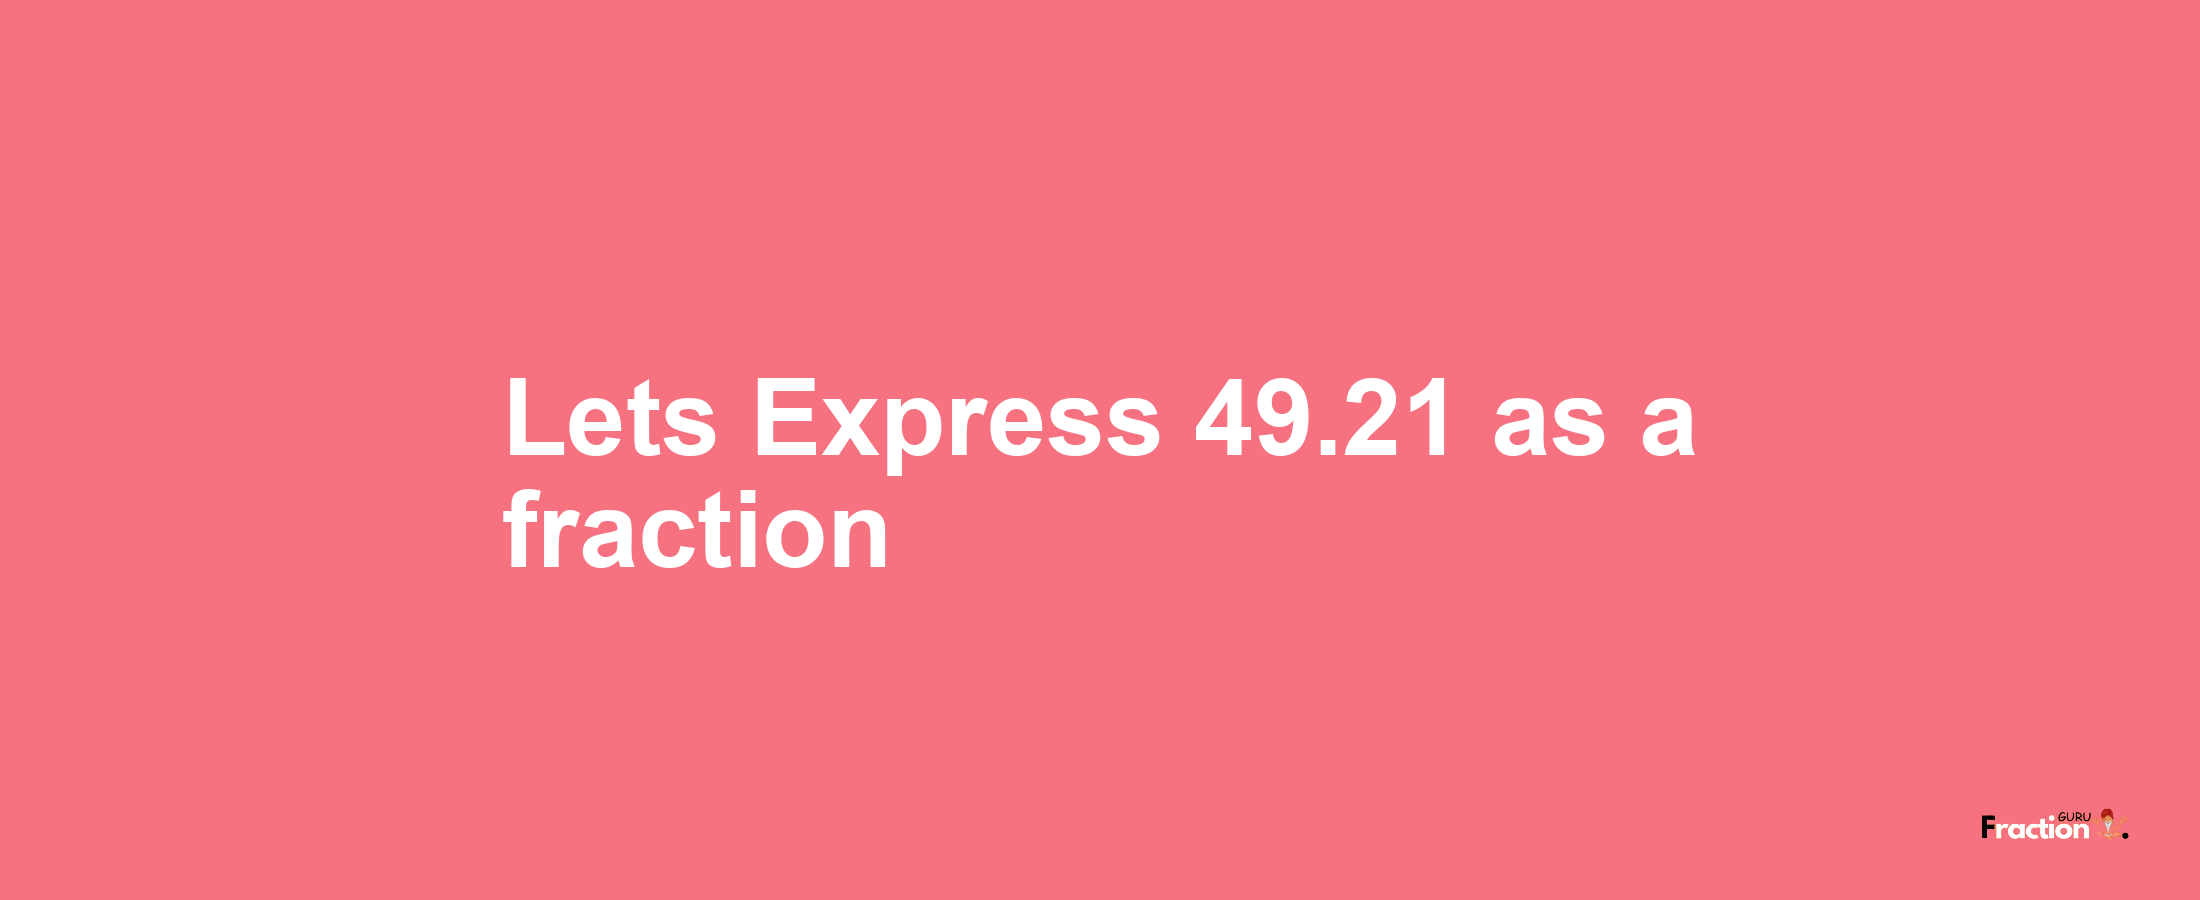 Lets Express 49.21 as afraction